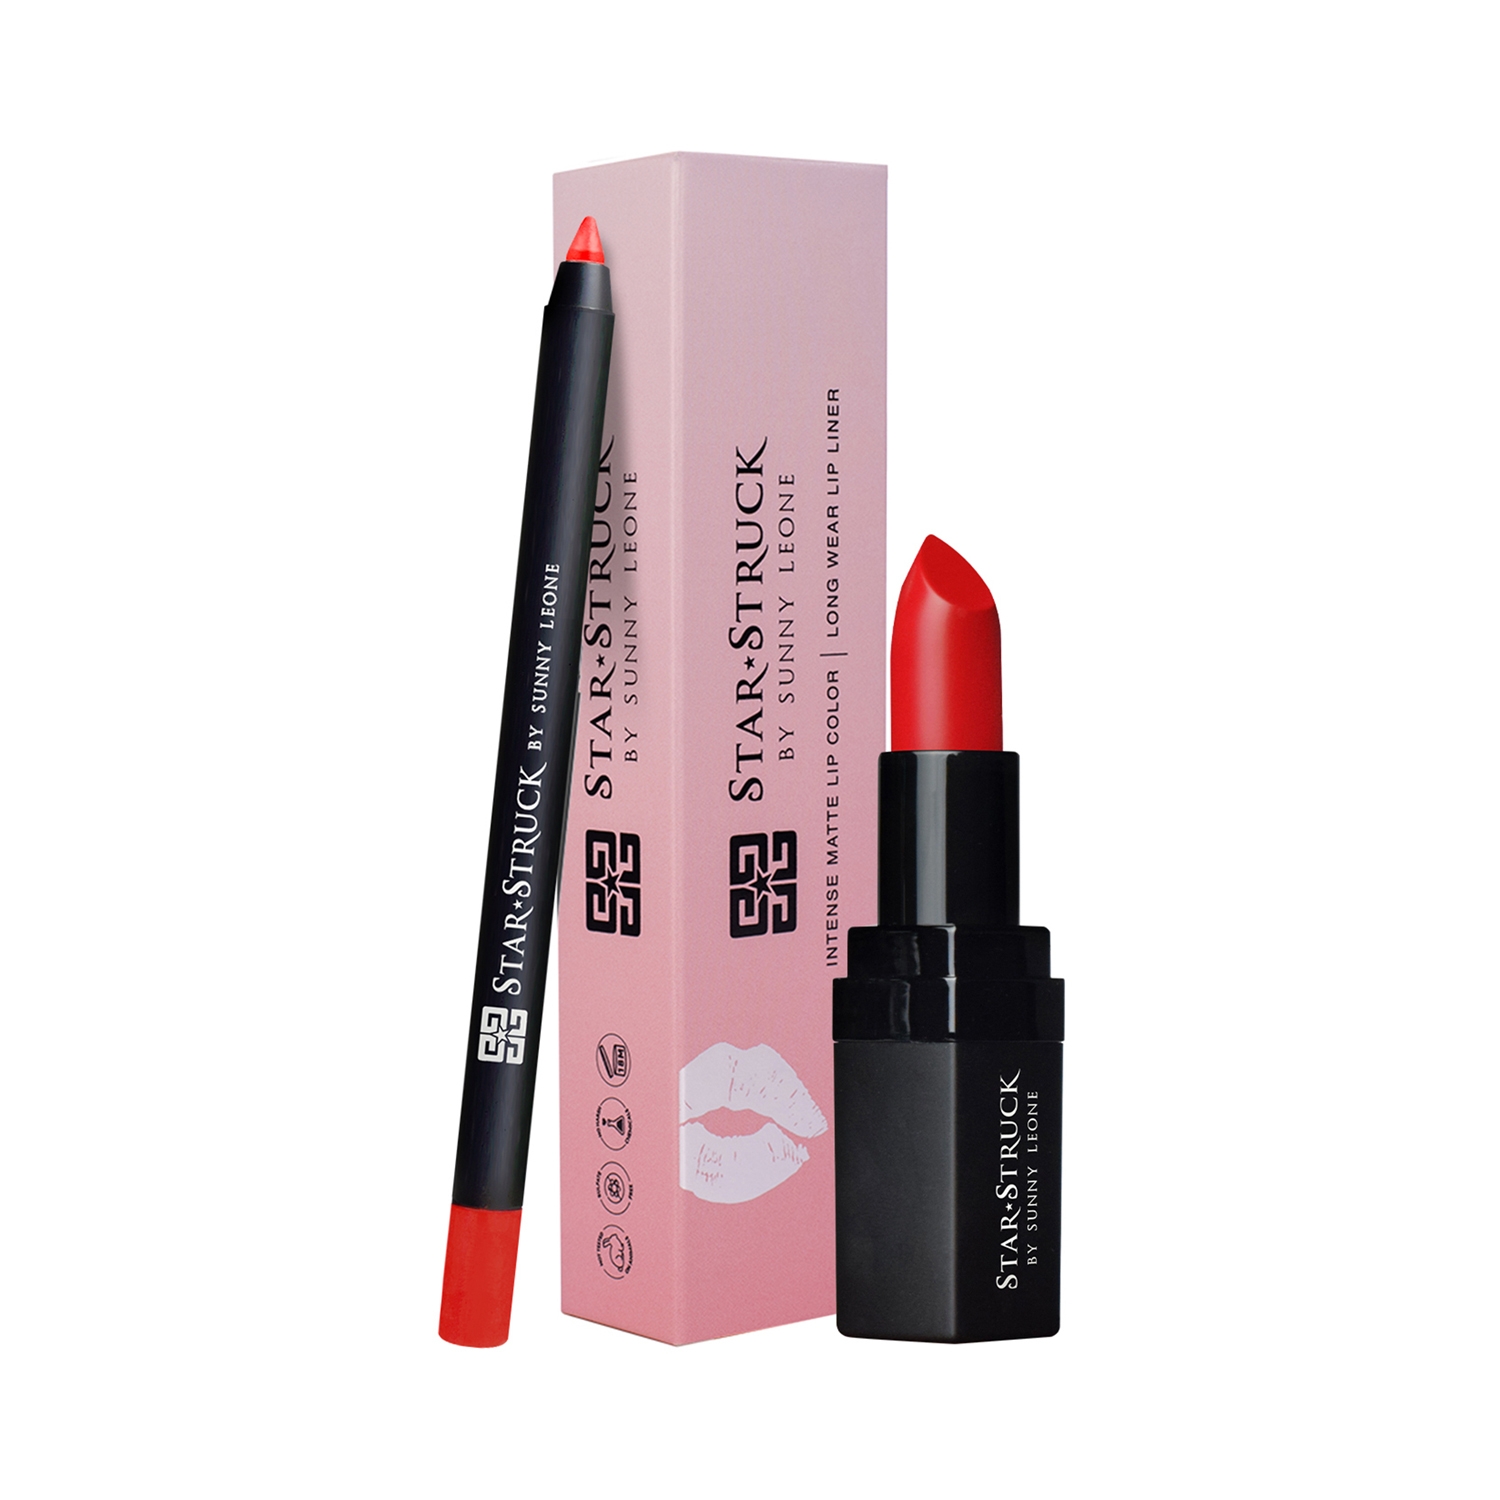 Star Struck by Sunny Leone | Star Struck by Sunny Leone Long Wear Lip Liner And Intense Matte Lipstick - Red Carpet (2 Pcs)